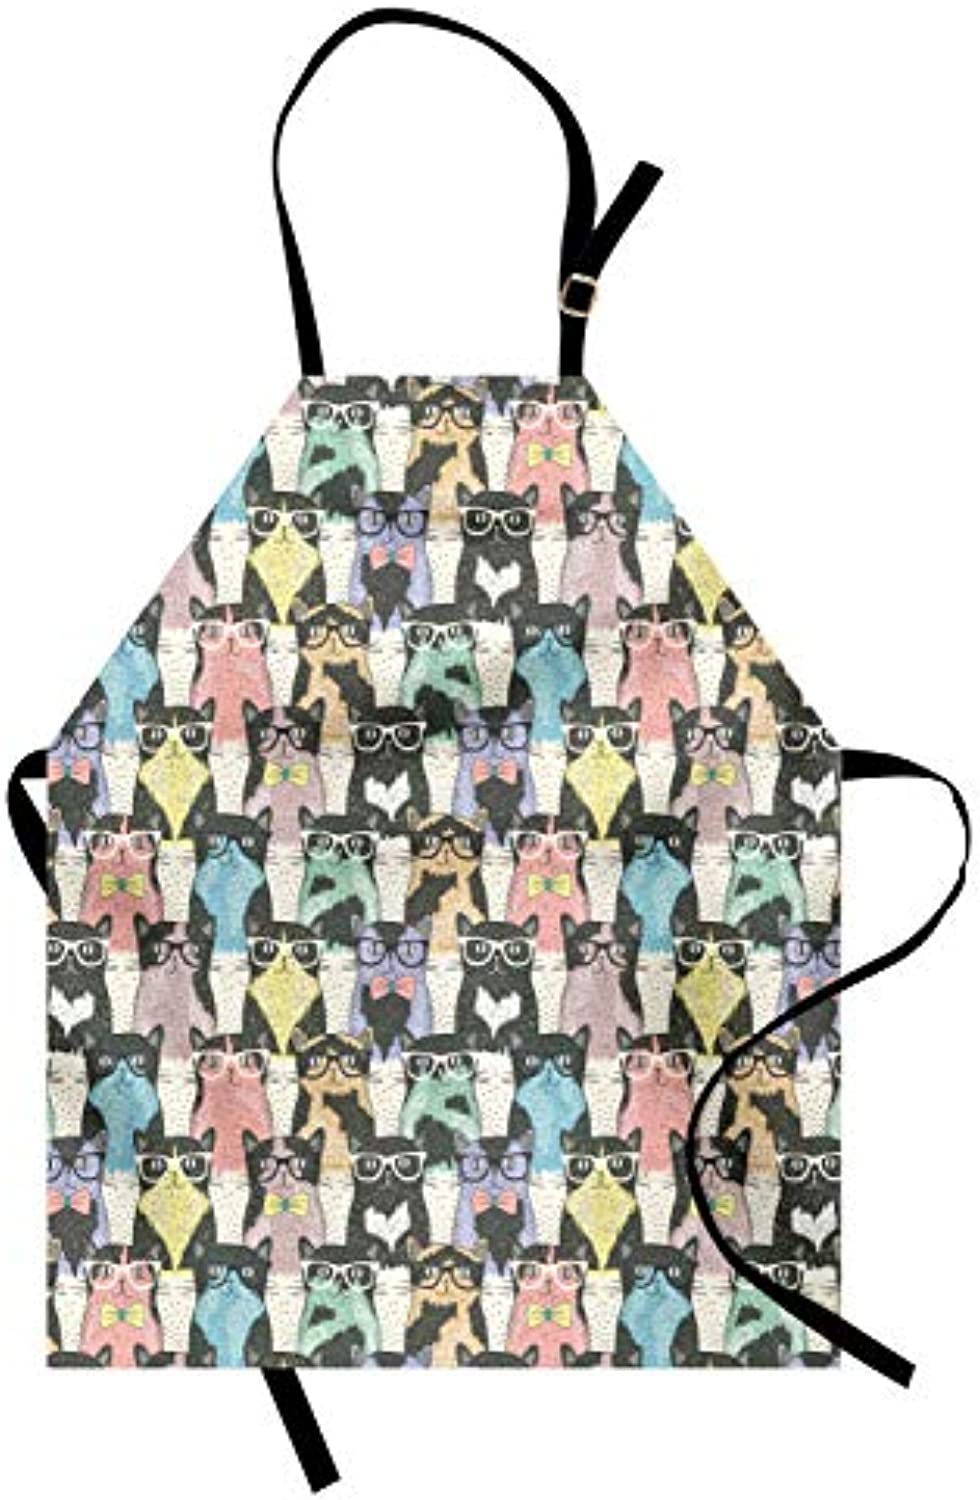 Granbey Funny Cartoon Apron  Theme of Playful Hipster Cats with Glasses Colorful Dotted Designed Print  Unisex Kitchen Bib with Adjustable Neck for Cooking Gardening  Adult Size  Charcoal Grey